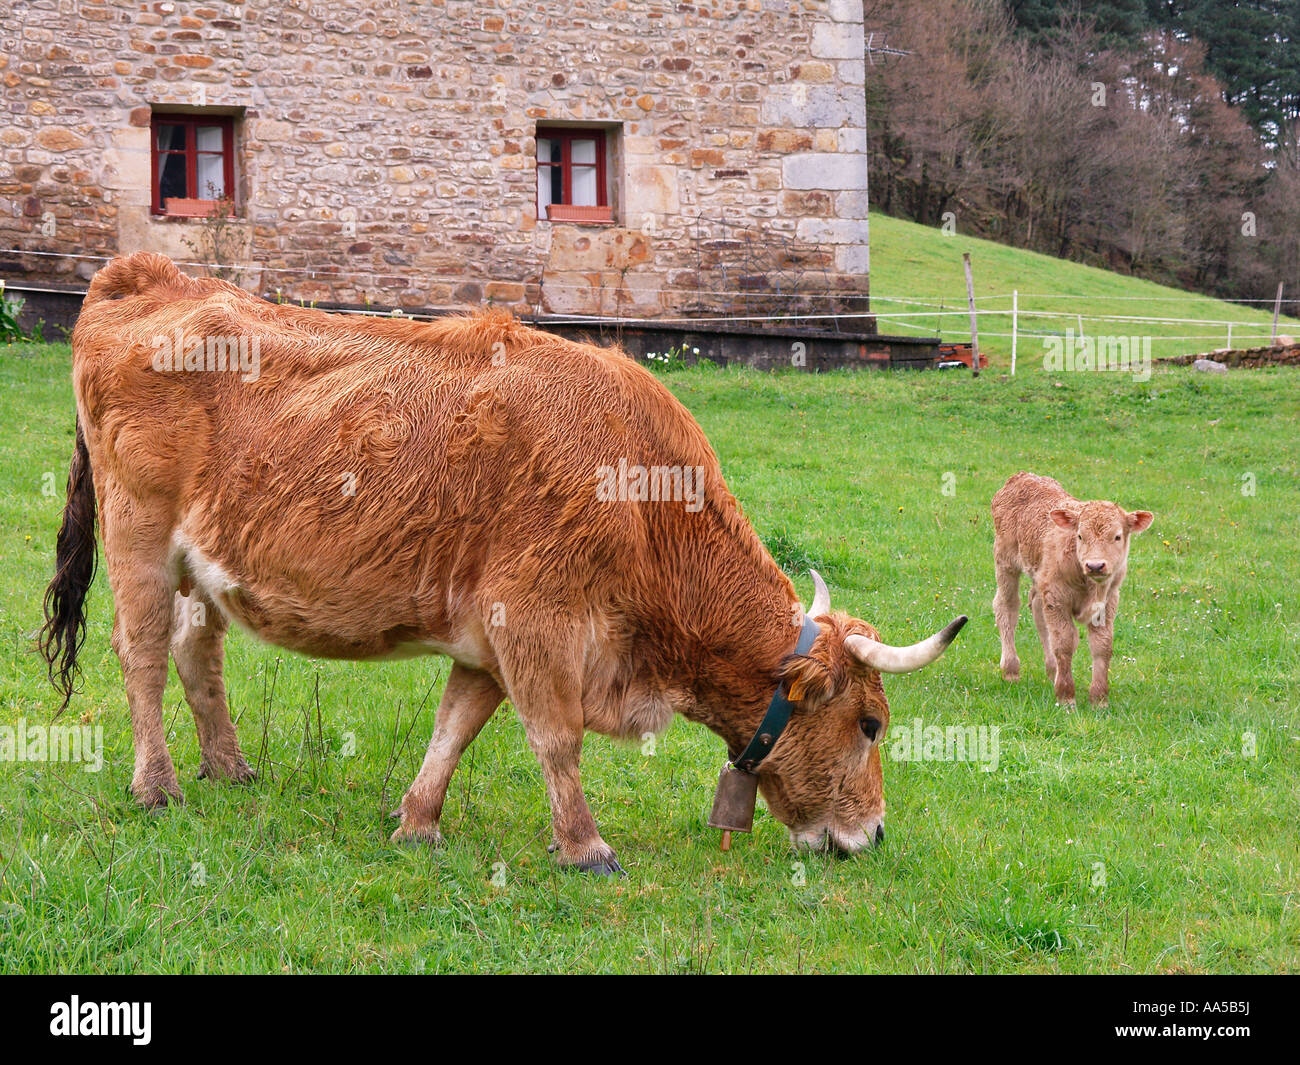 Cow and calf in Atxondo Valley, Axpe, Basque Country, Spain Stock Photo